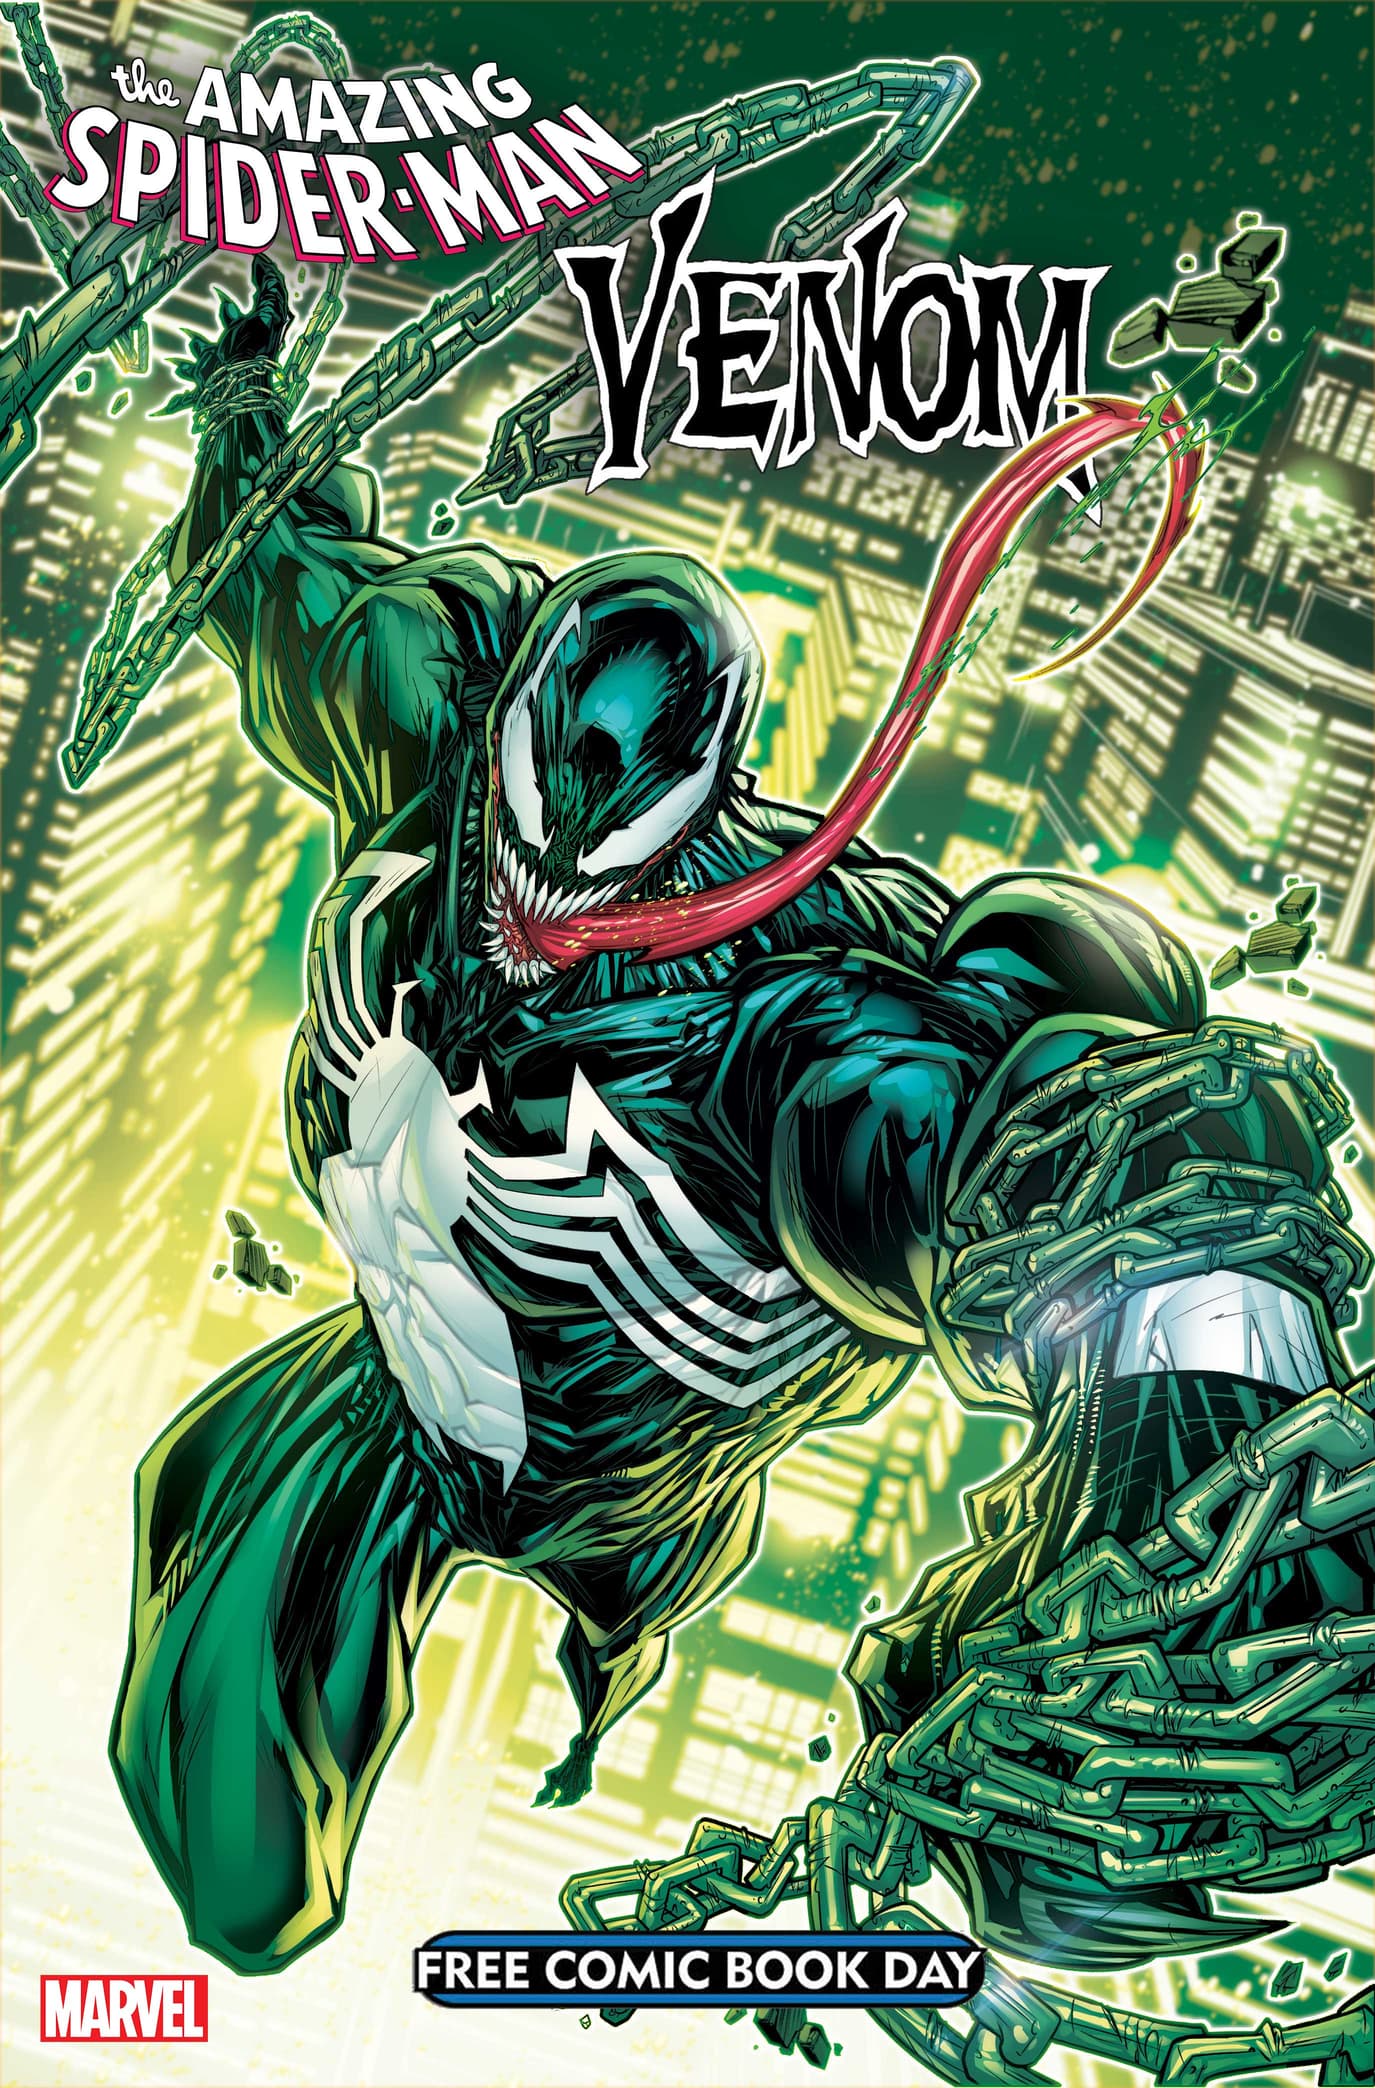 FREE COMIC BOOK DAY: SPIDER-MAN/VENOM #1 Variant Cover by JONBOY MEYERS